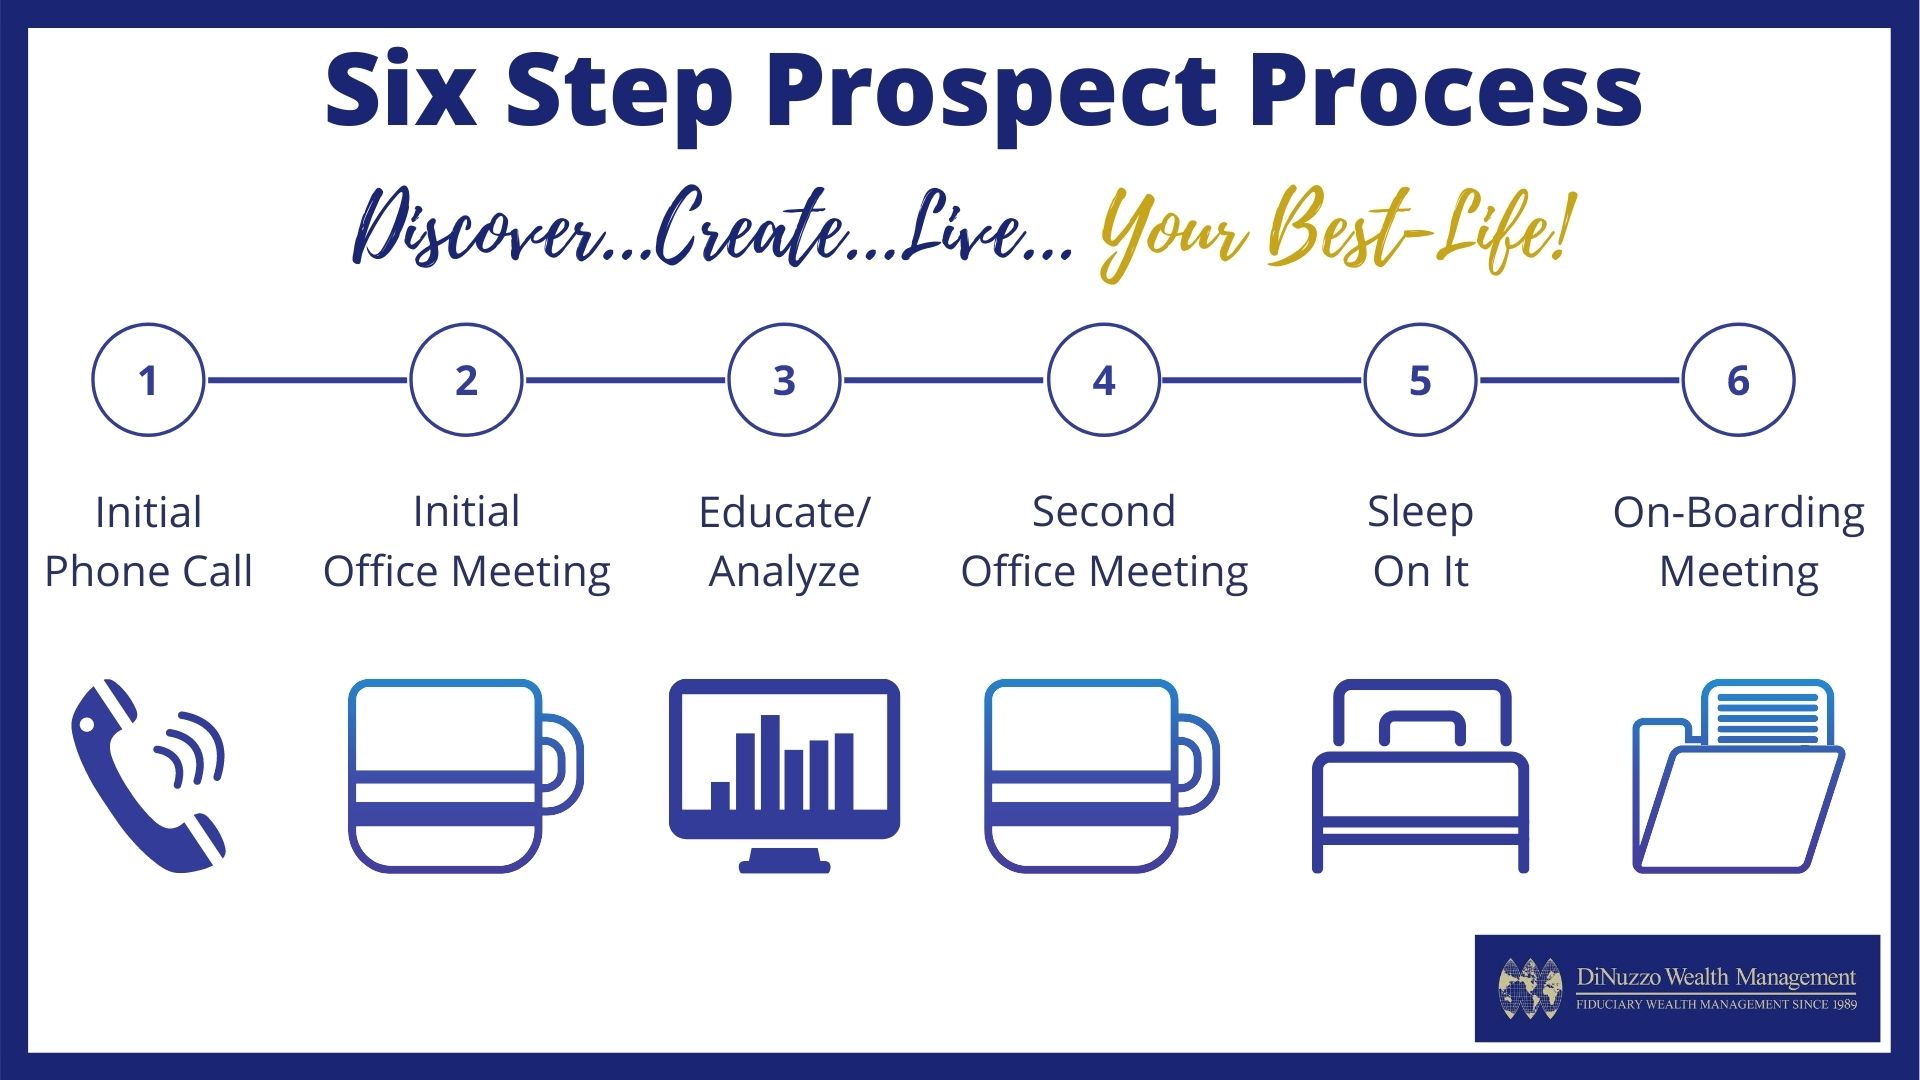 Our 6 Step Process at DiNuzzo Wealth Management